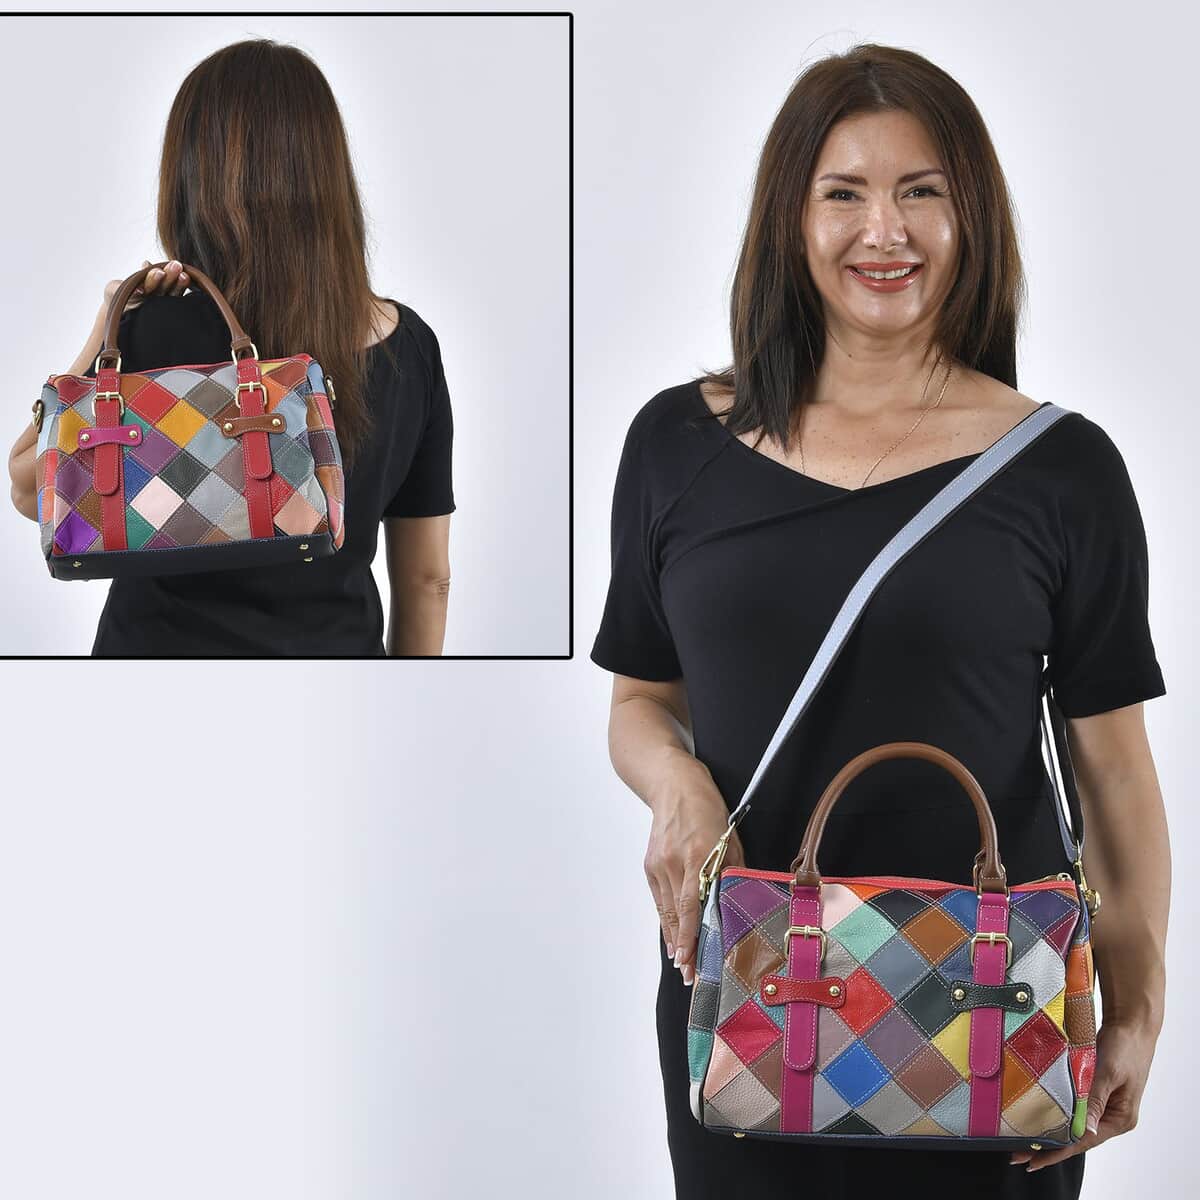 Rainbow Color Genuine Leather Tote Bag (12.5"x6.5"x8") with Handle Drop and Detachable Shoulder Strap image number 1